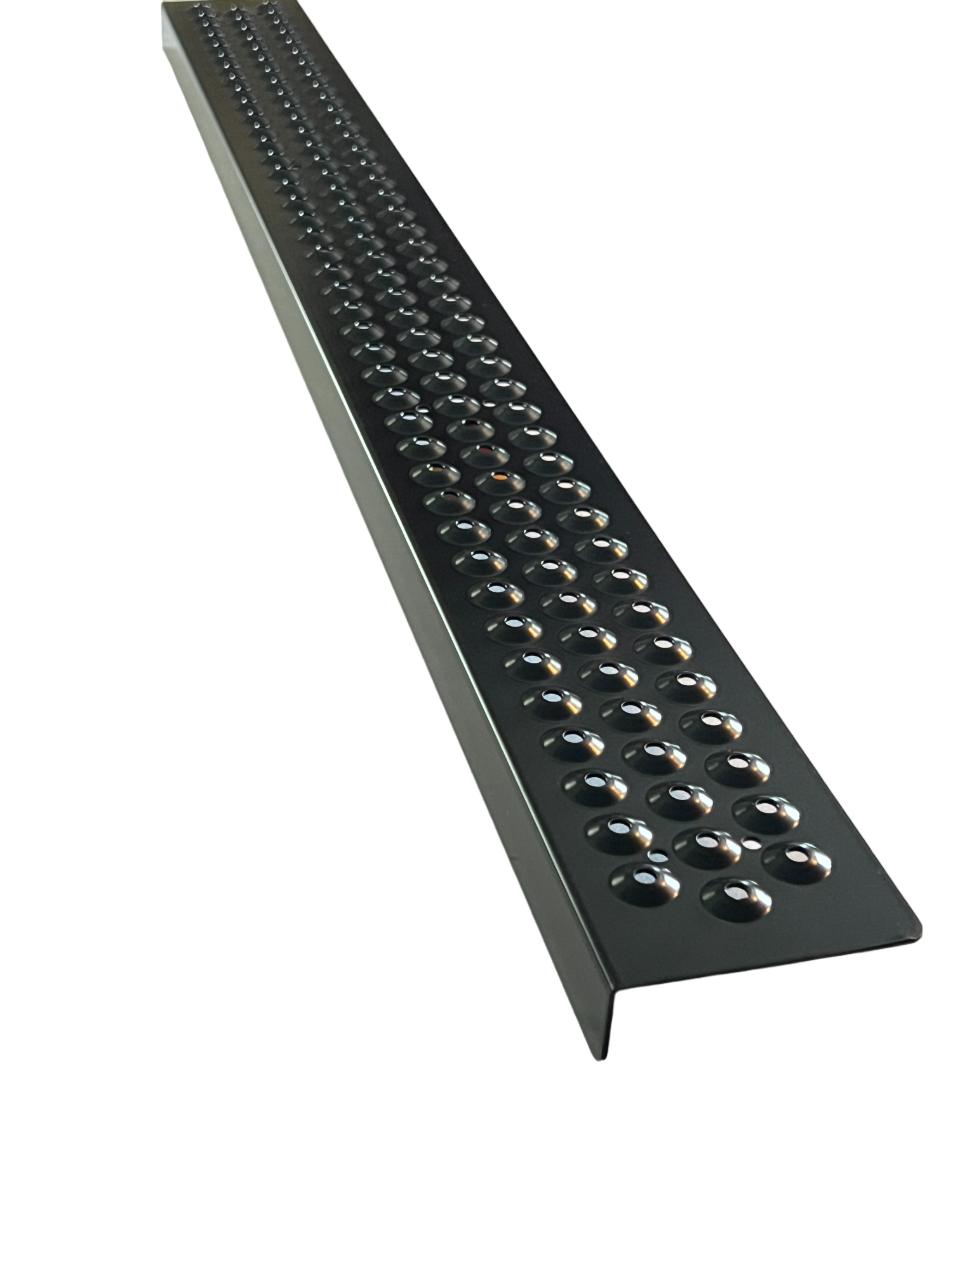 Aluminum Grip Stair Cover Treads - Signal Black, Includes Stainless Steel 1" Screws - 3" x 32" w/ 1" Nose